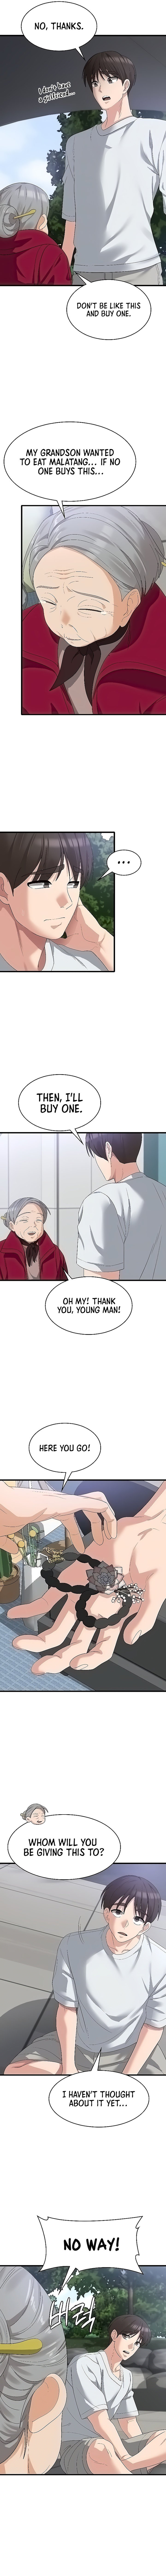 sexy-man-and-woman-chap-39-1